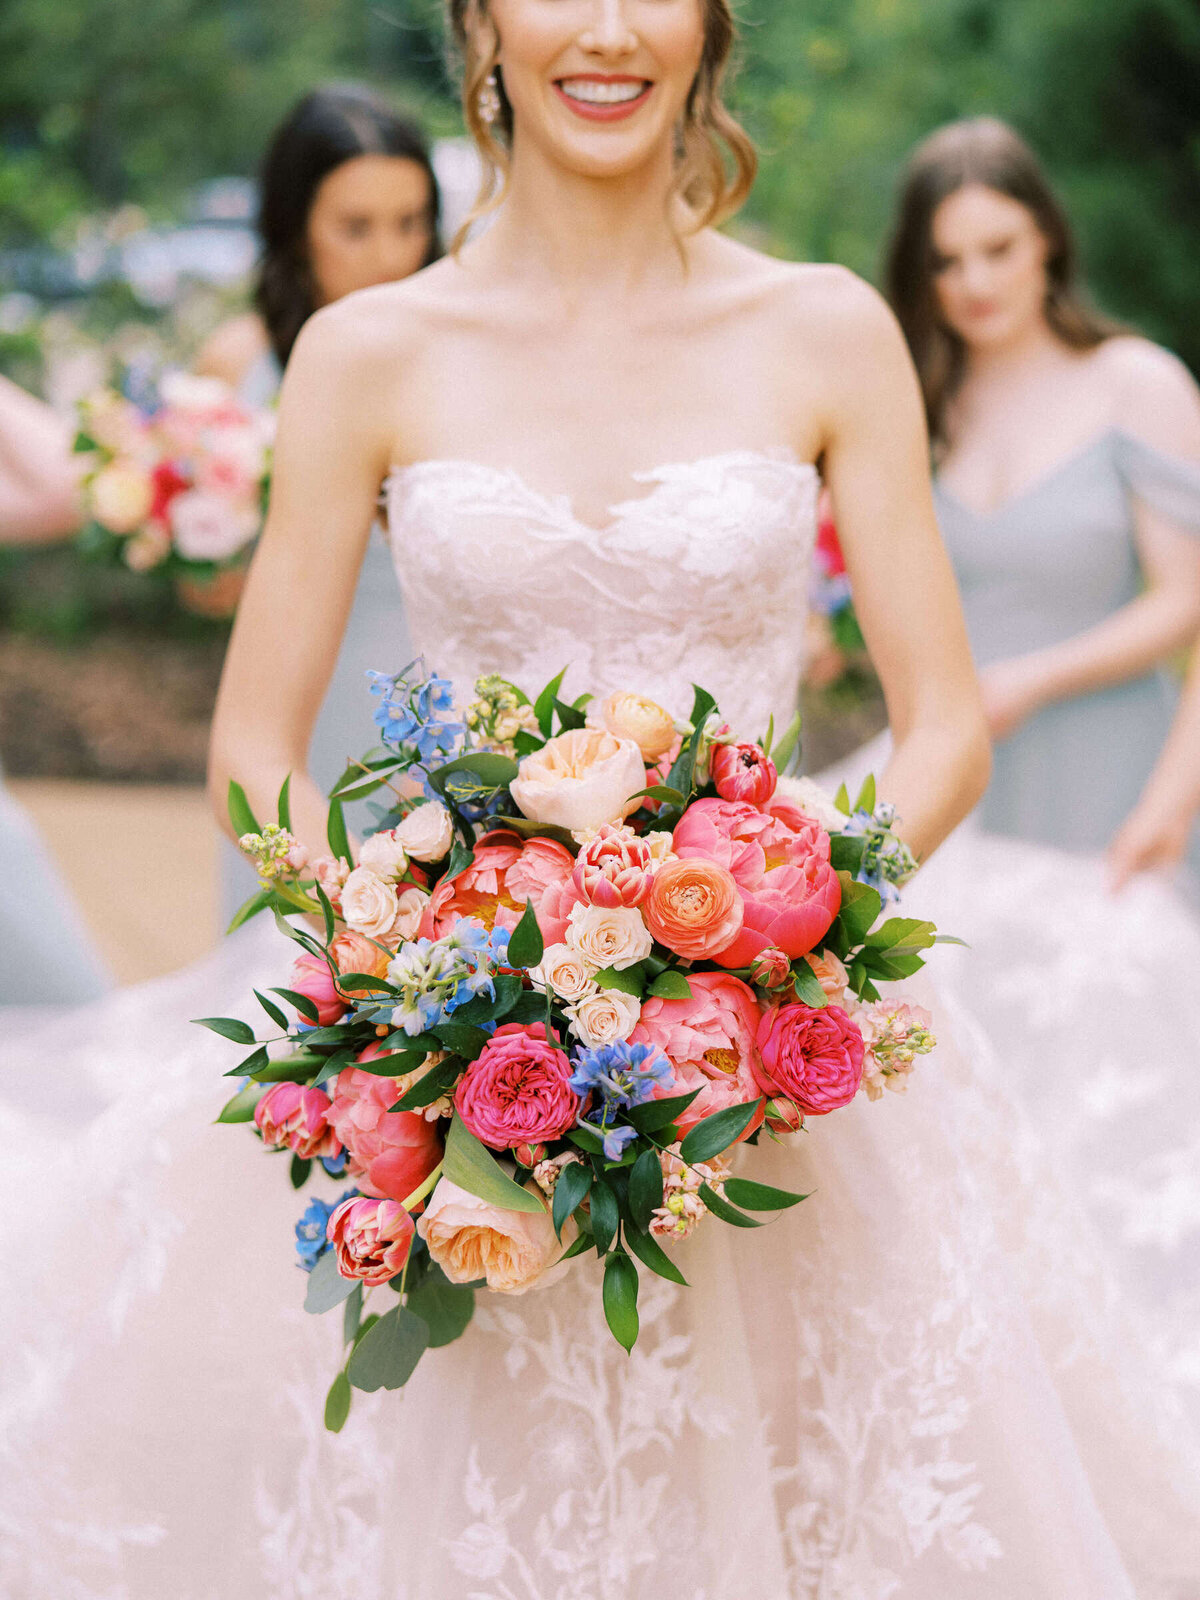 Bride smiles wearing her Monique Lhuillier wedding dress and holding colorful bouquet